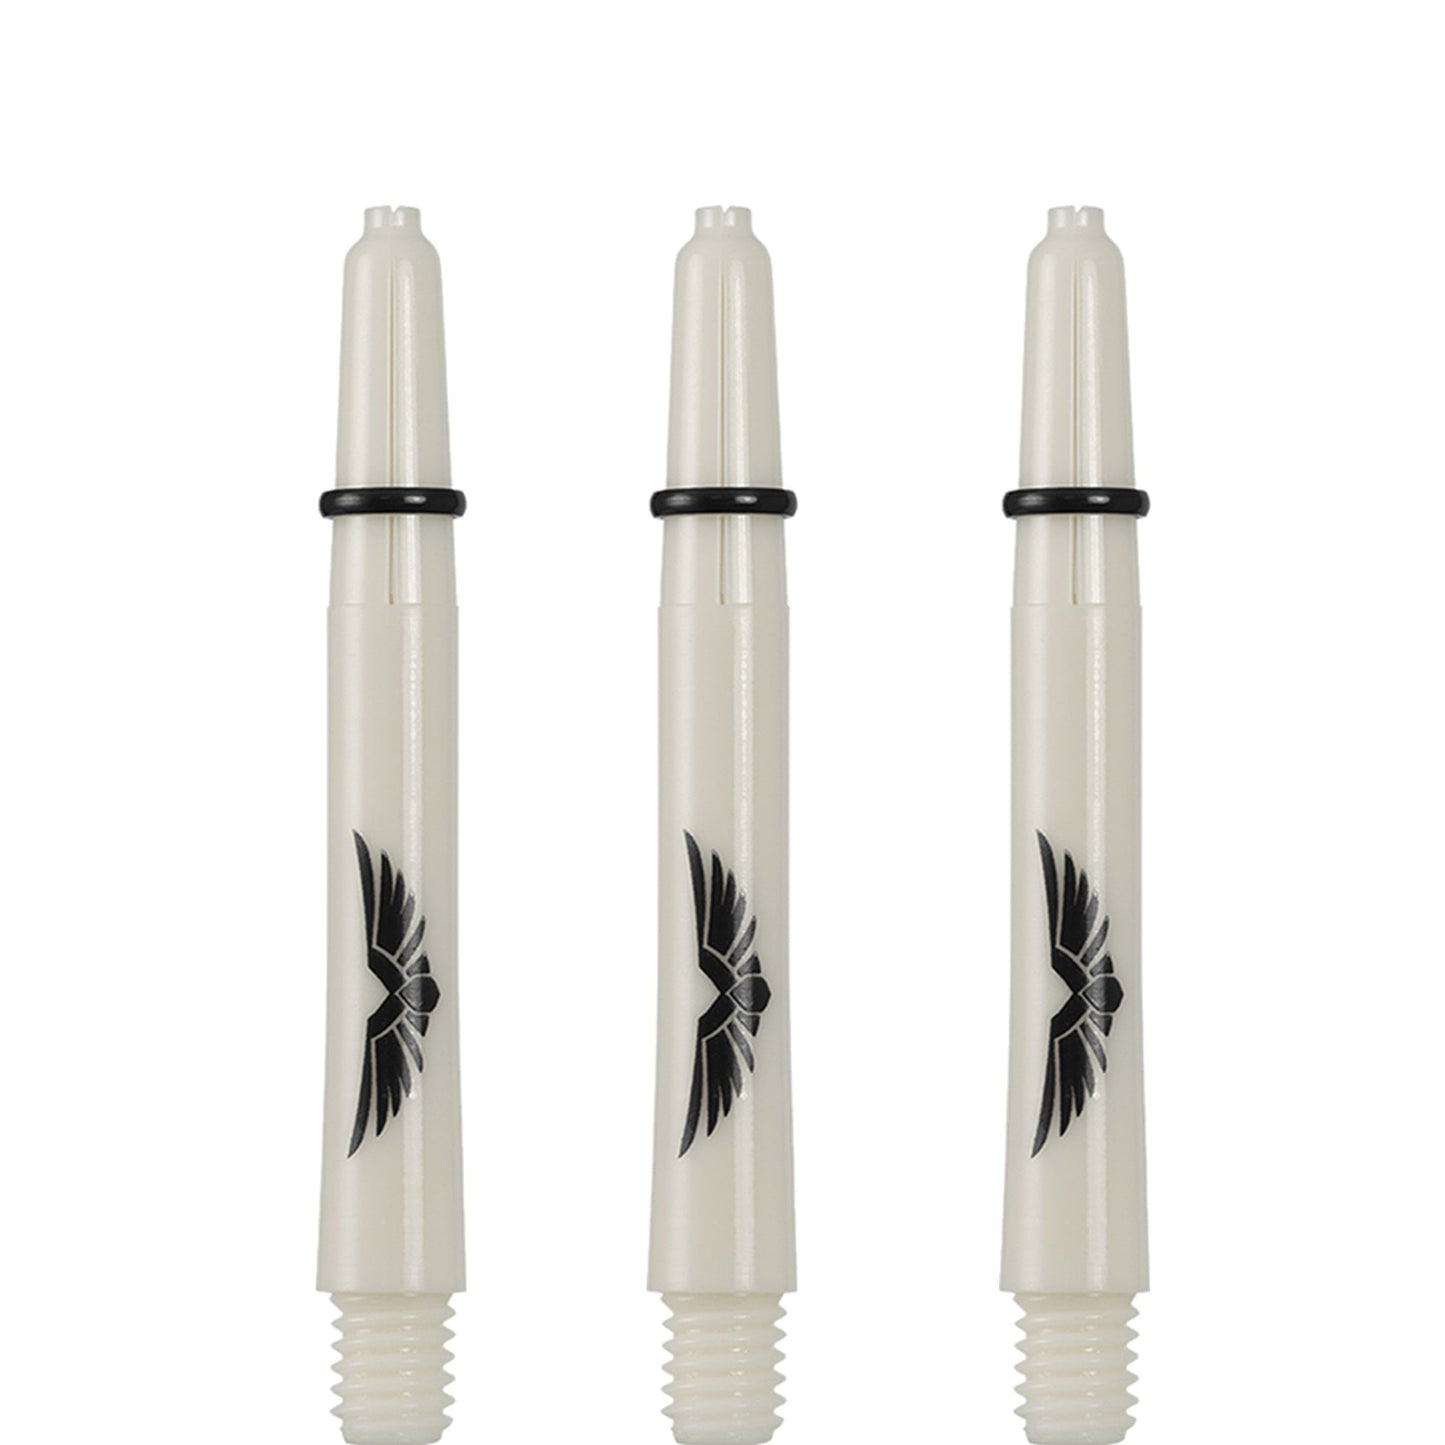 Shot Eagle Claw Dart Shafts - with Machined Rings - Strong Polycarbonate Stems - Bone White Tweenie